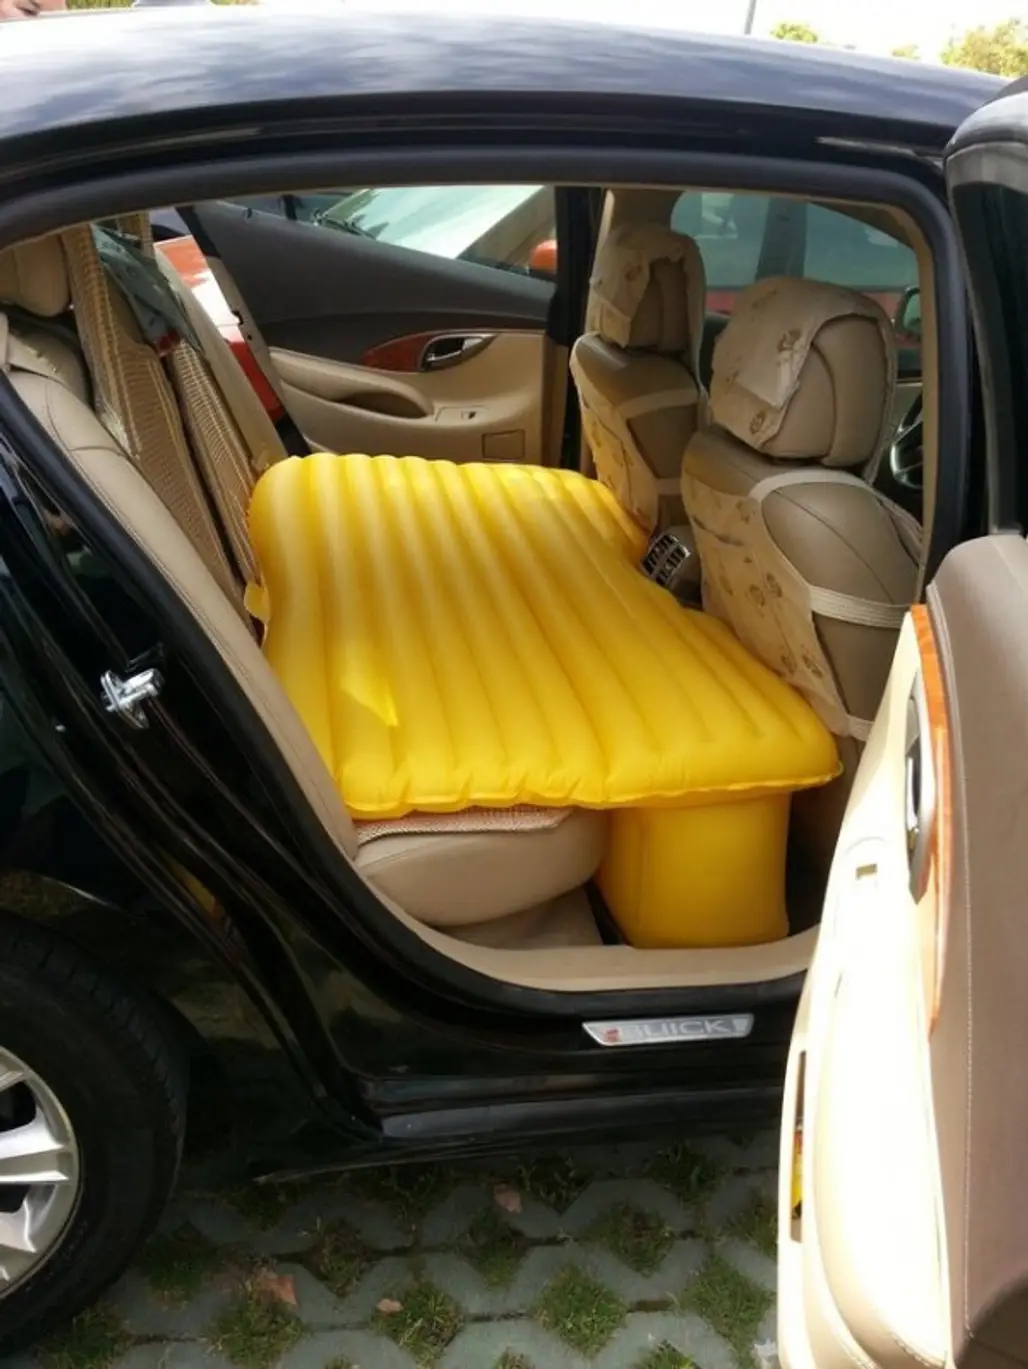 Use an Air Bed to Convert the Back Seat for Sleeping